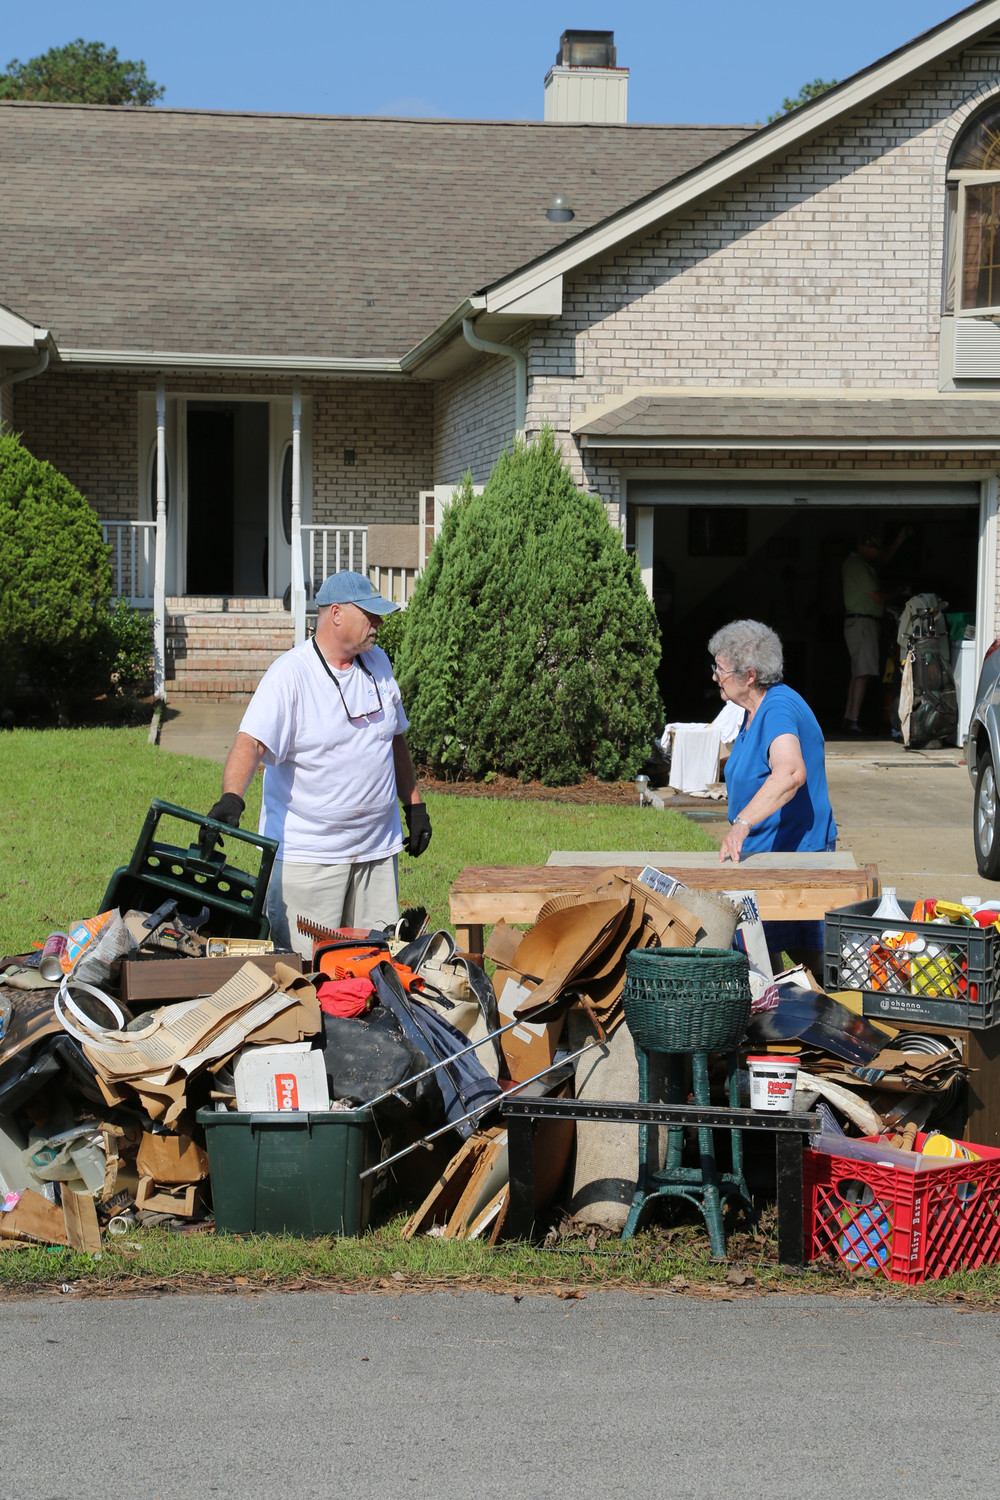 John Carrere, a member of the Knights of Columbus, volunteers Sept. 22 to help clean up after Hurricane Florence at the home of Nancy Sciara, a fellow parishioner at St. Paul Catholic Church in New Bern, North Carolina